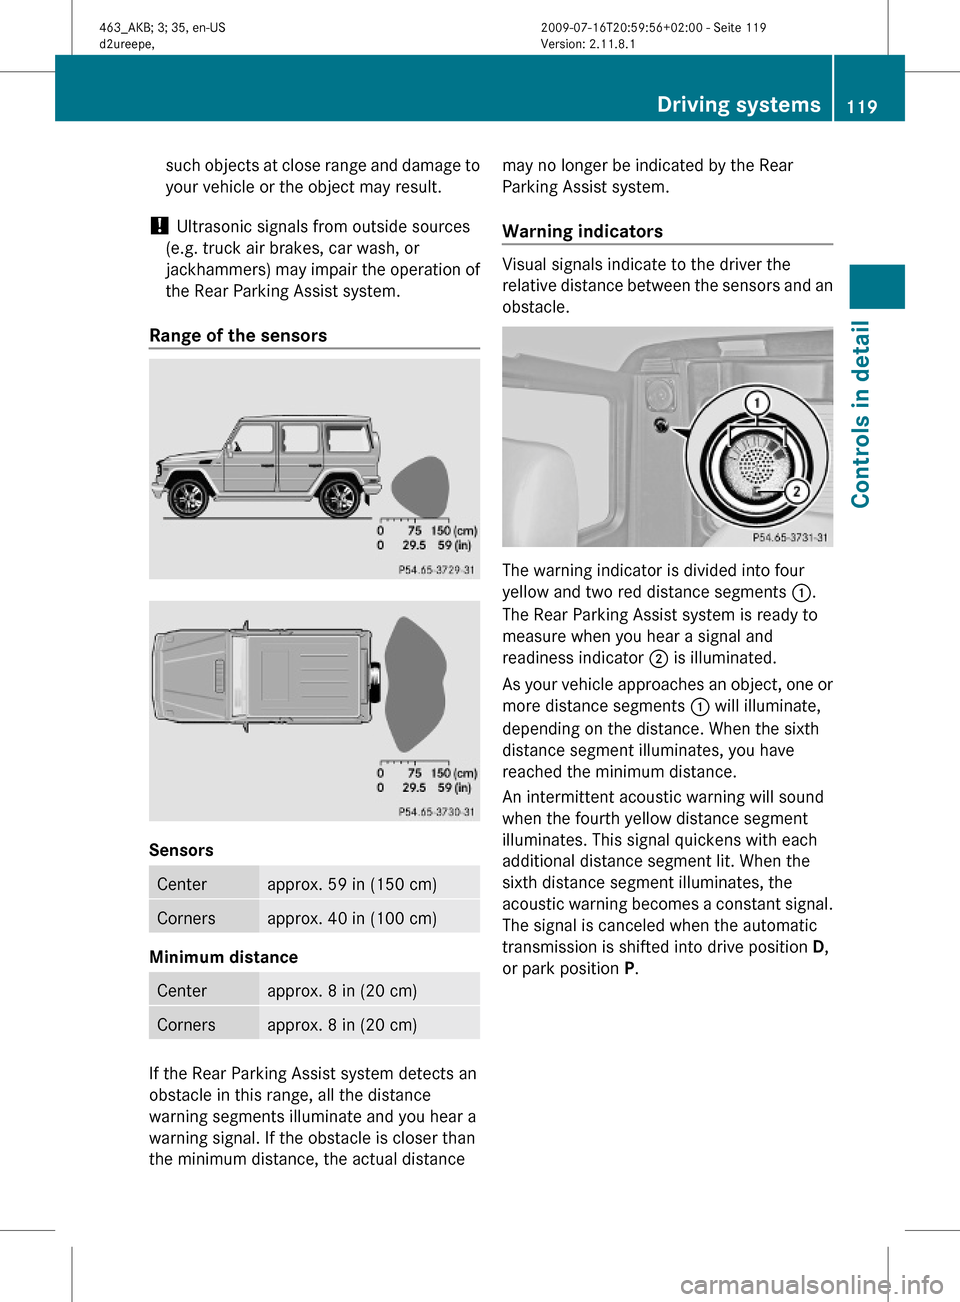 MERCEDES-BENZ G550 2010 W463 Owners Manual such objects at close range and damage to
your vehicle or the object may result.
! Ultrasonic signals from outside sources
(e.g. truck air brakes, car wash, or
jackhammers) may impair the operation of